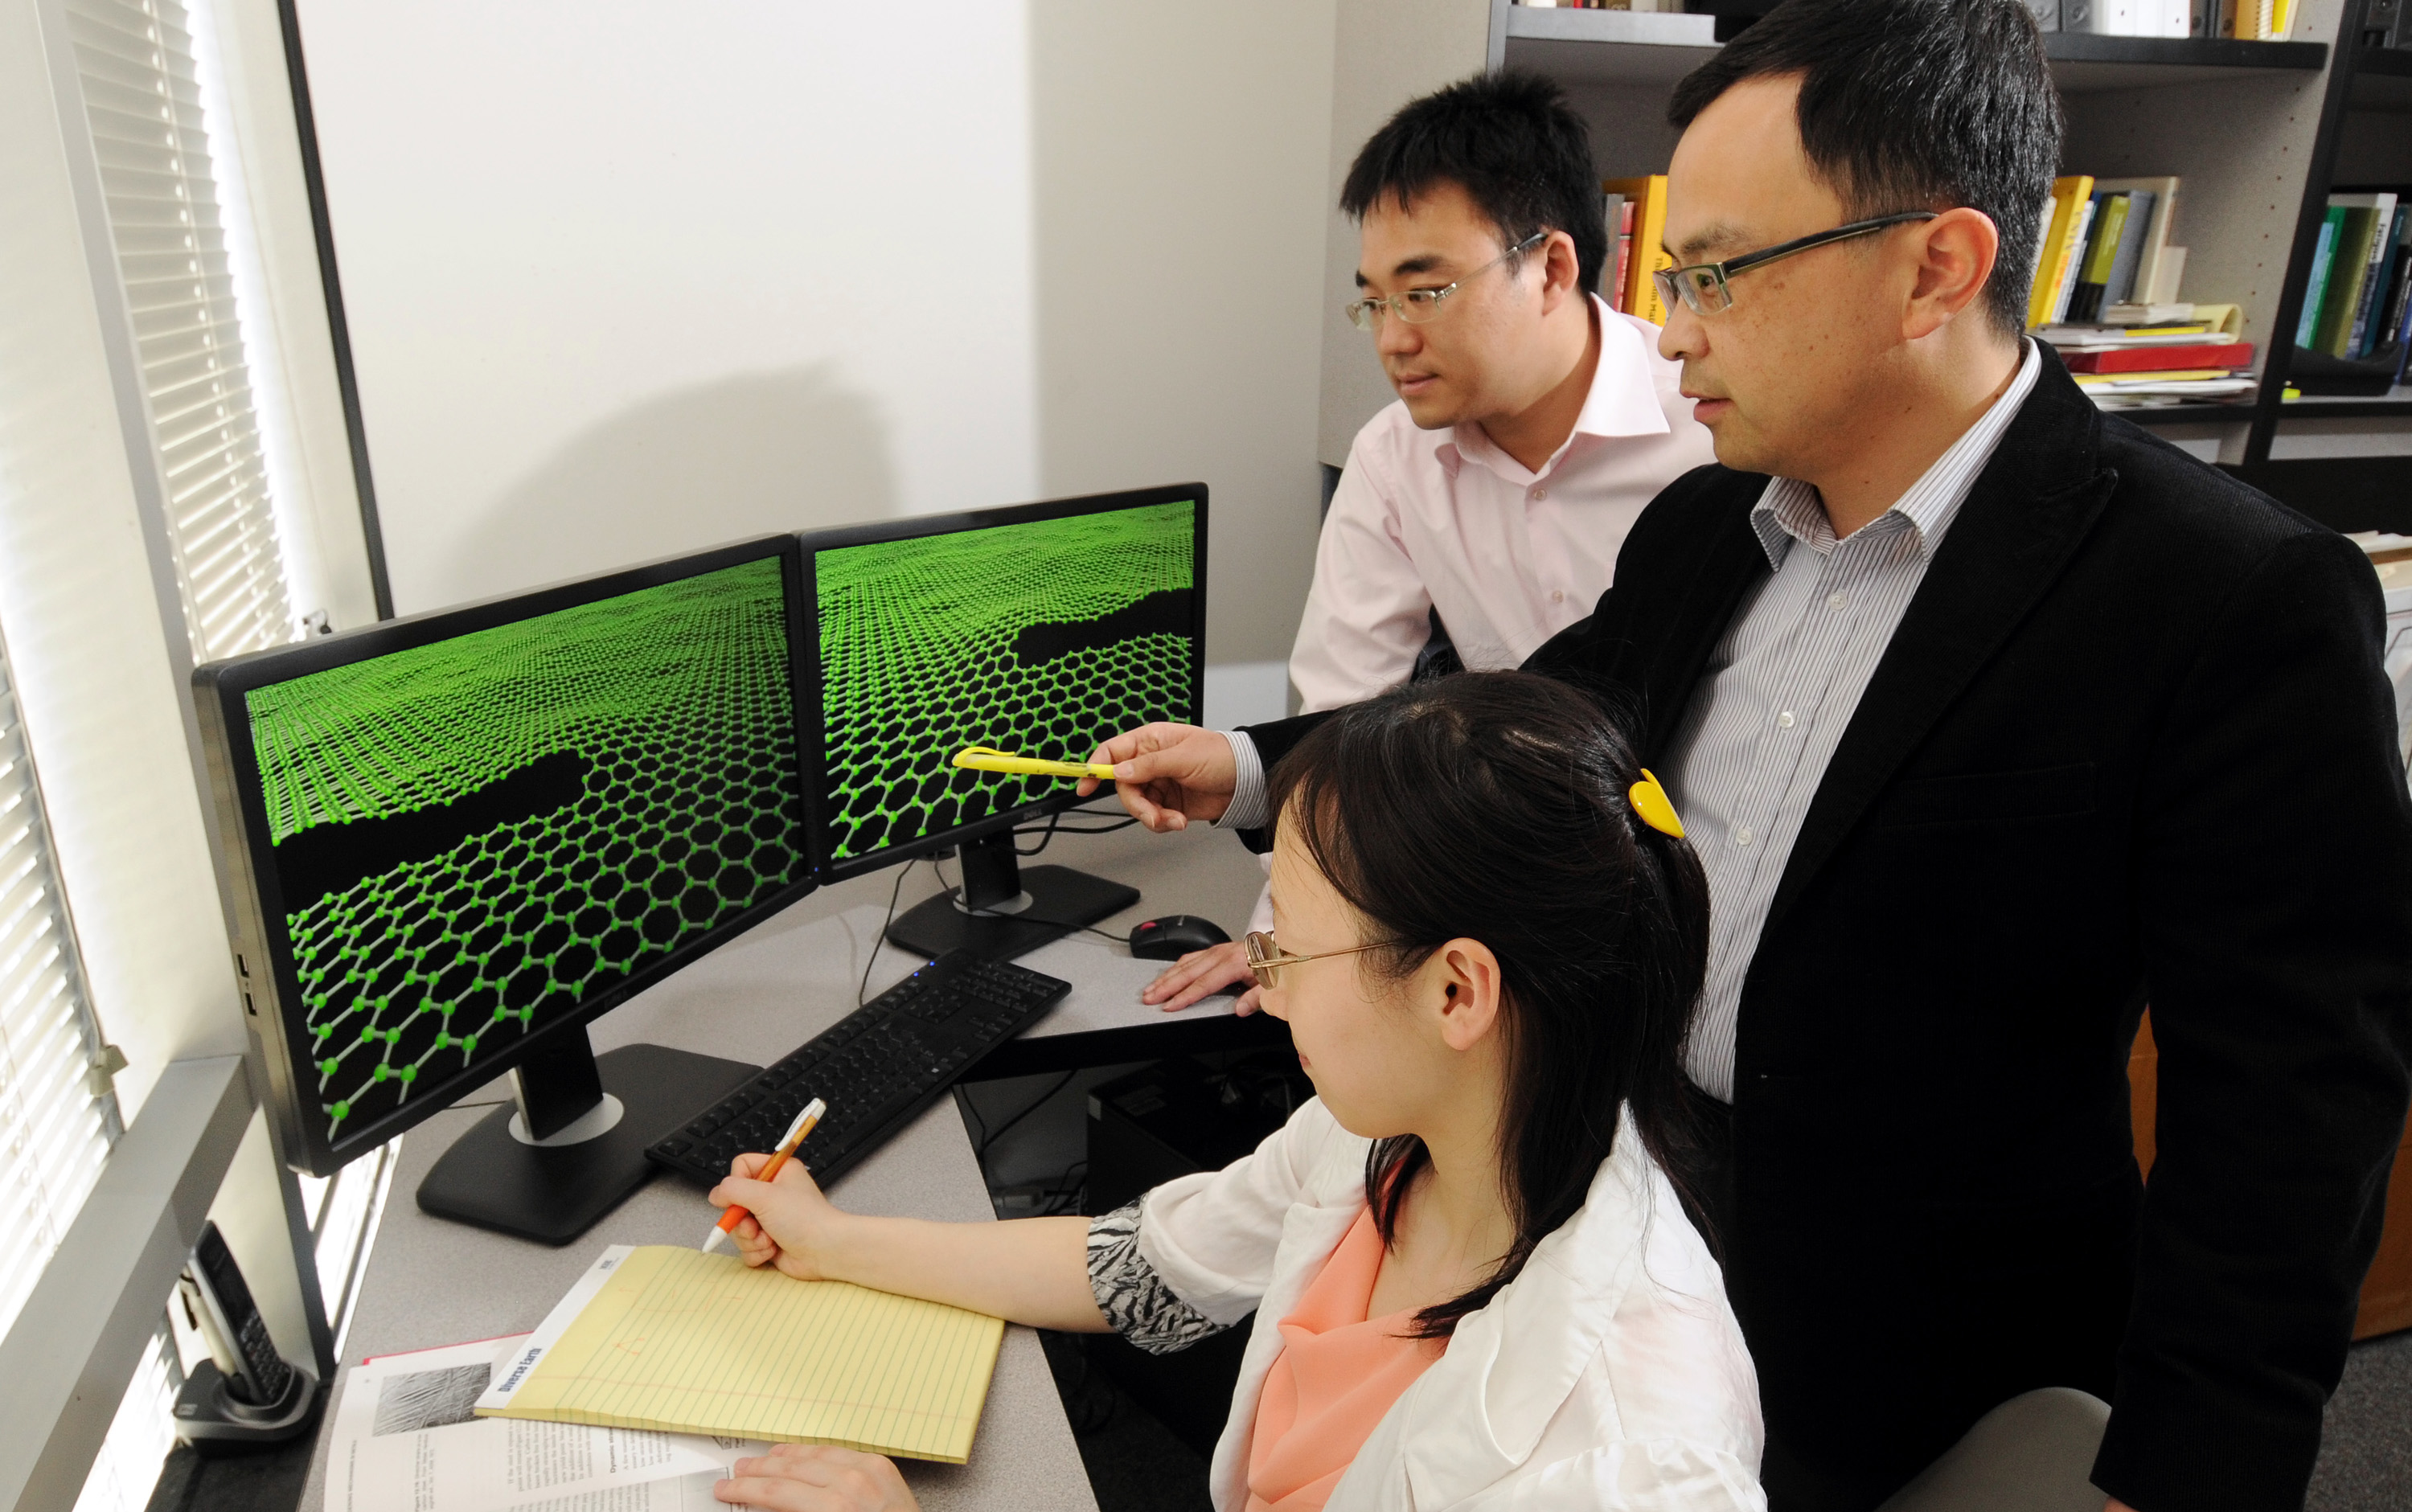 Ting Zhu, right, an associate professor in the George W. Woodruff School of Mechanical Engineering at Georgia Tech, works with graduate students Feifei Fan, seated, and Zhi Zeng to calculate the fracture toughness of graphene that has been pre-cracked. Georgia Tech's calculations and physical experiments at Rice University led to the conclusion that graphene, the one-atom layer of carbon, is only as strong as its weakest link. (Georgia Tech Photo: Gary Meek)